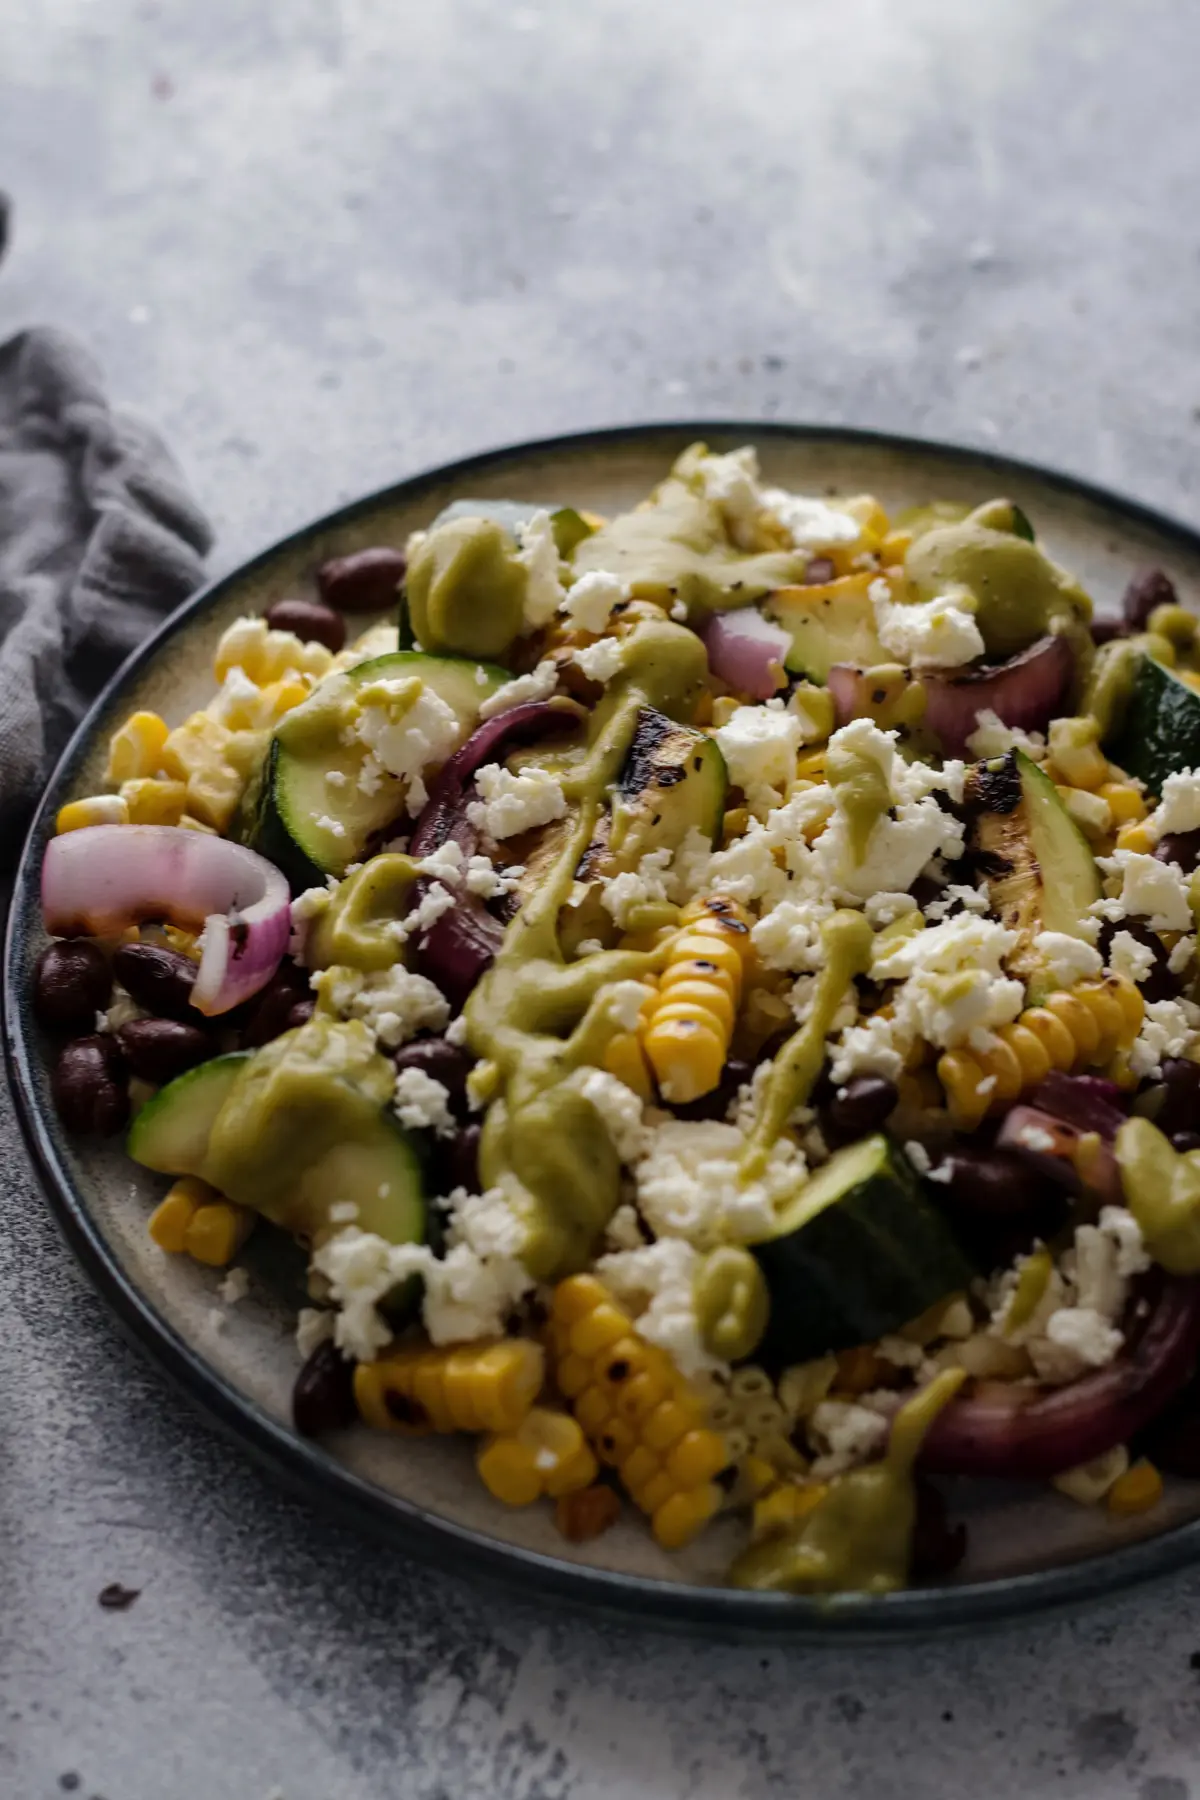 Grilled Zucchini and Corn Salad on a Grey Background.